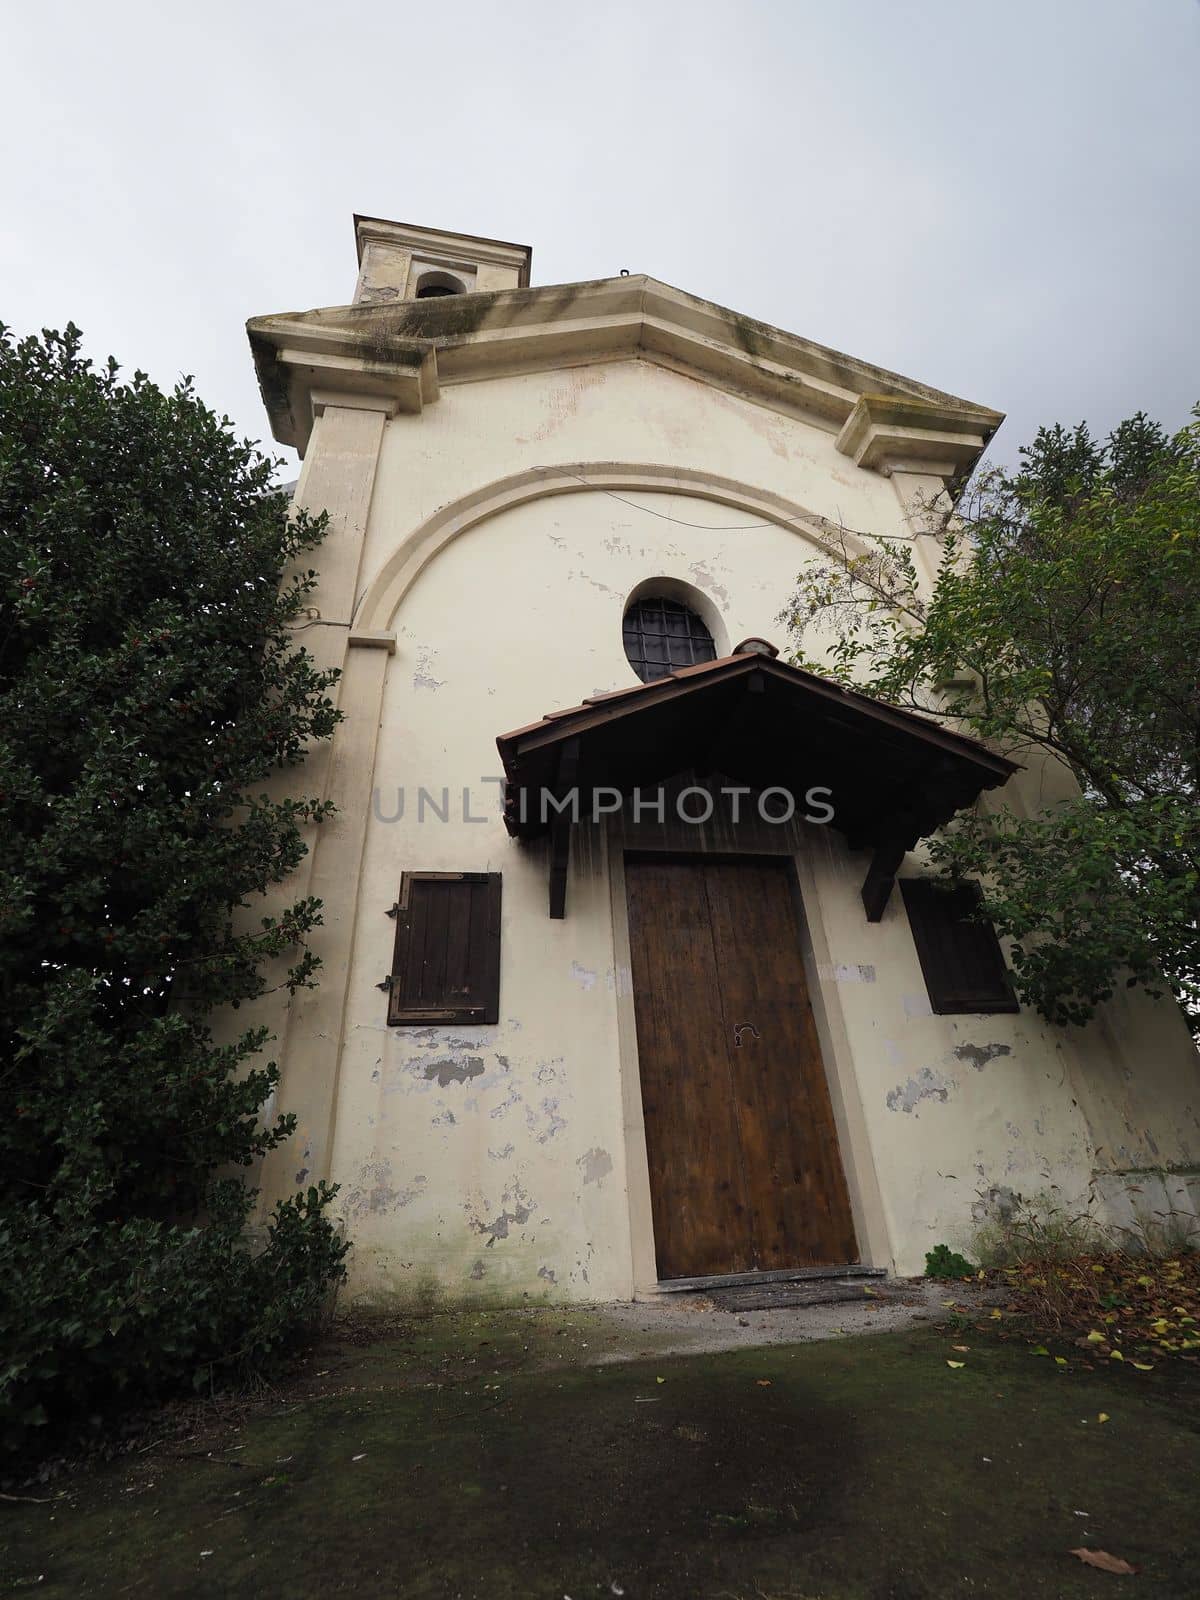 San Rocco (meaning Saint Roch) church in Settimo Torinese, Italy